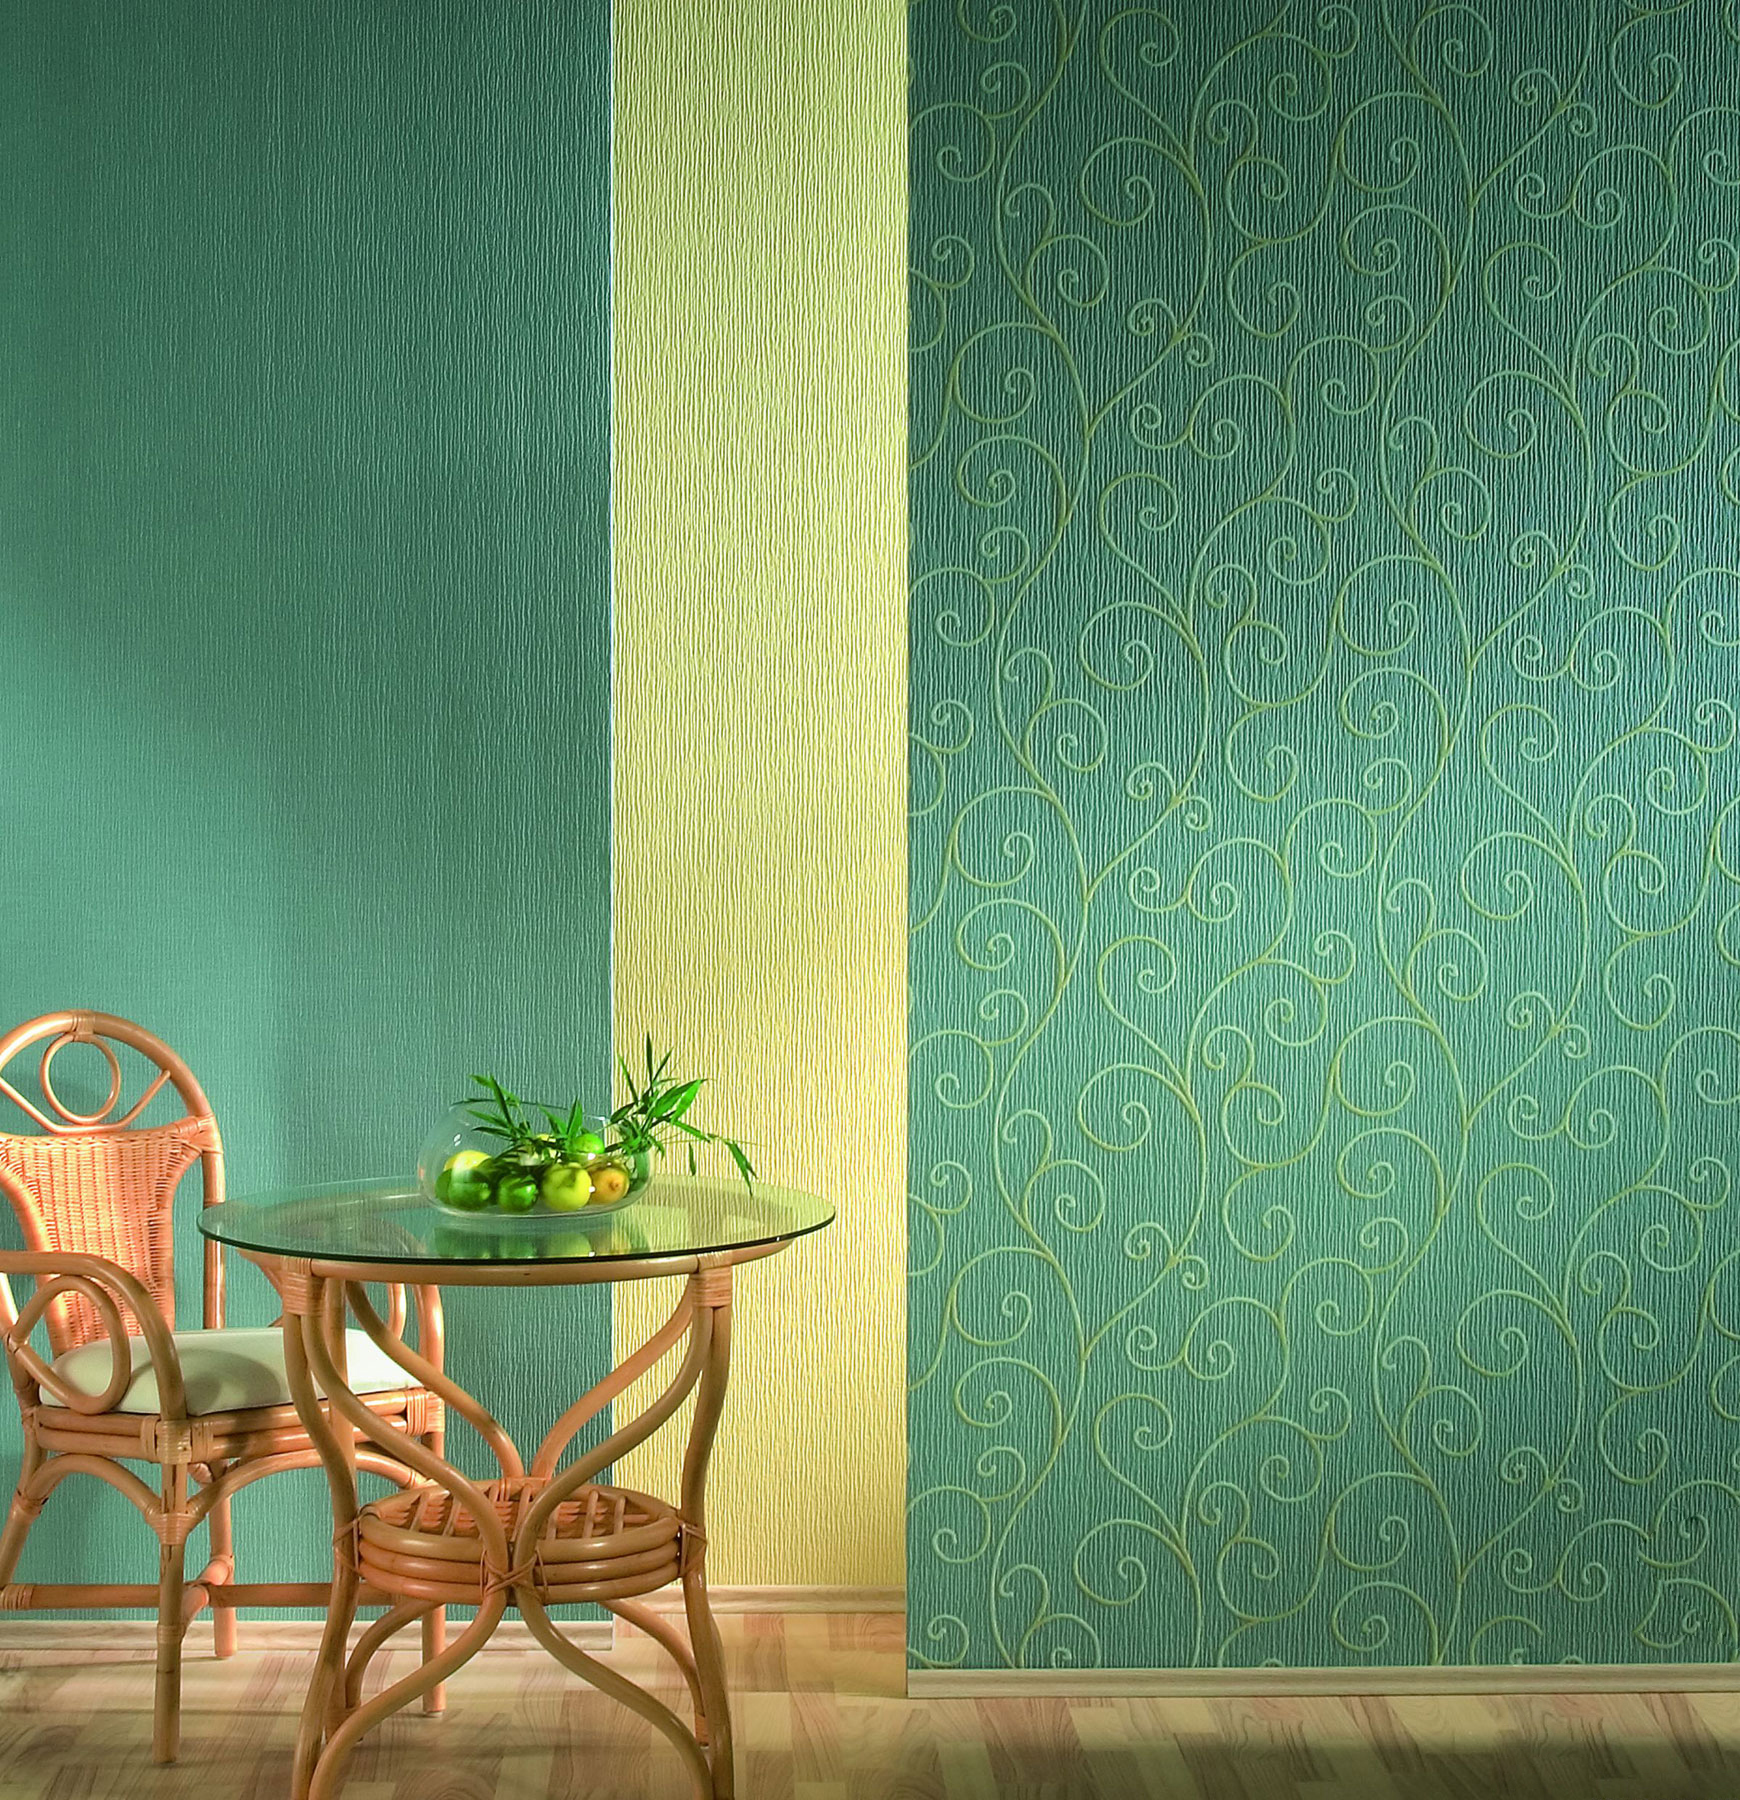 SUPROFIL® is a Marburgs brand for trendy wallcoverings, An elegant and 